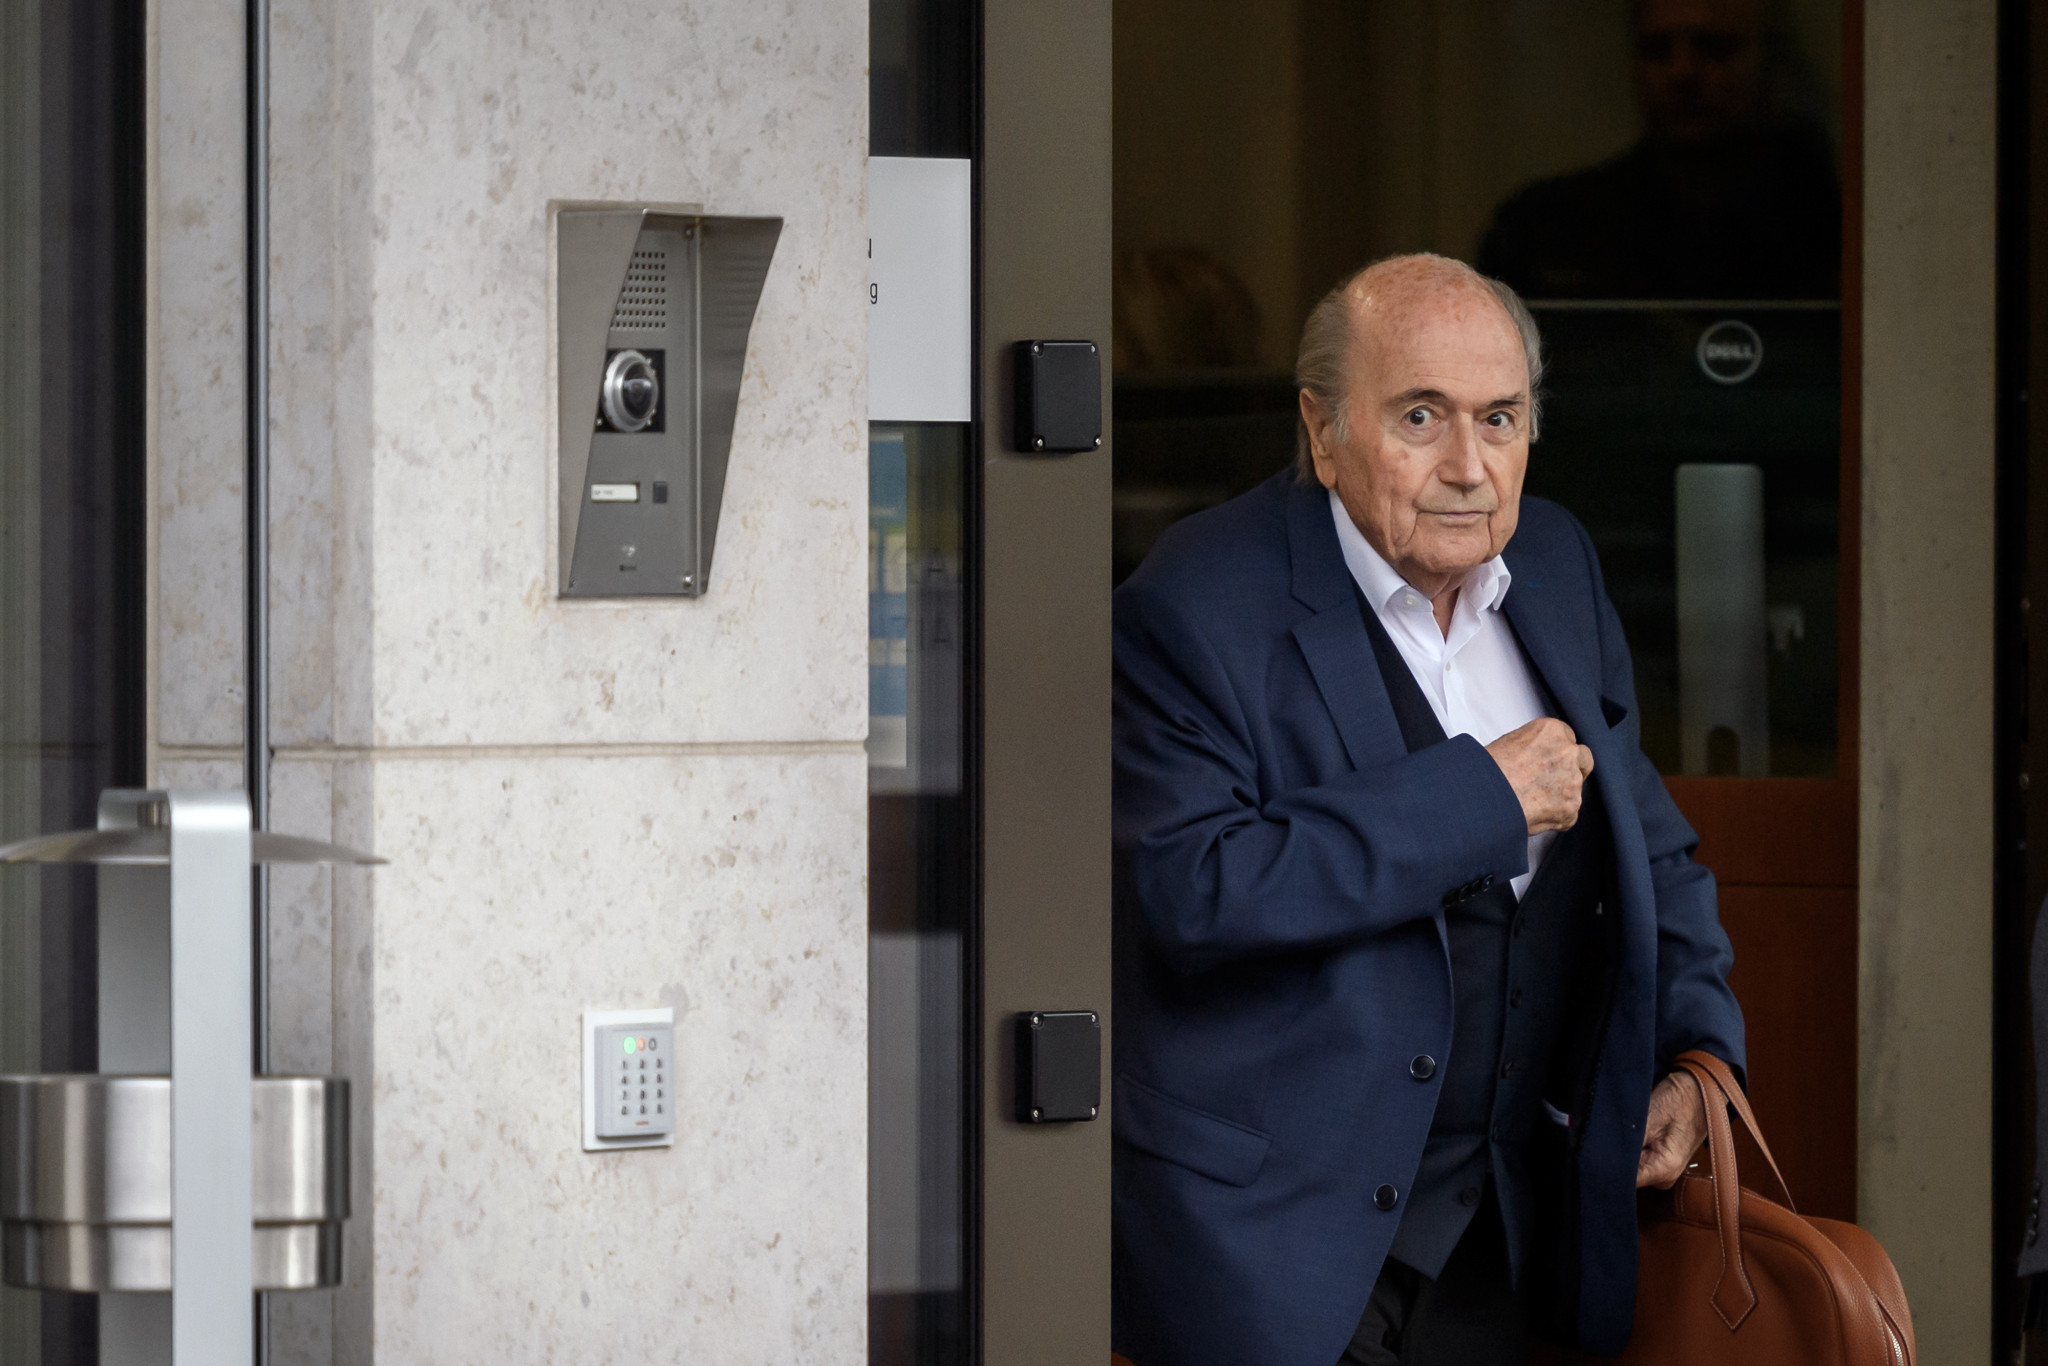 Former FIFA President Sepp Blatter has been questioned on the payment to former UEFA head Michel Platini in 2011 ©Getty Images